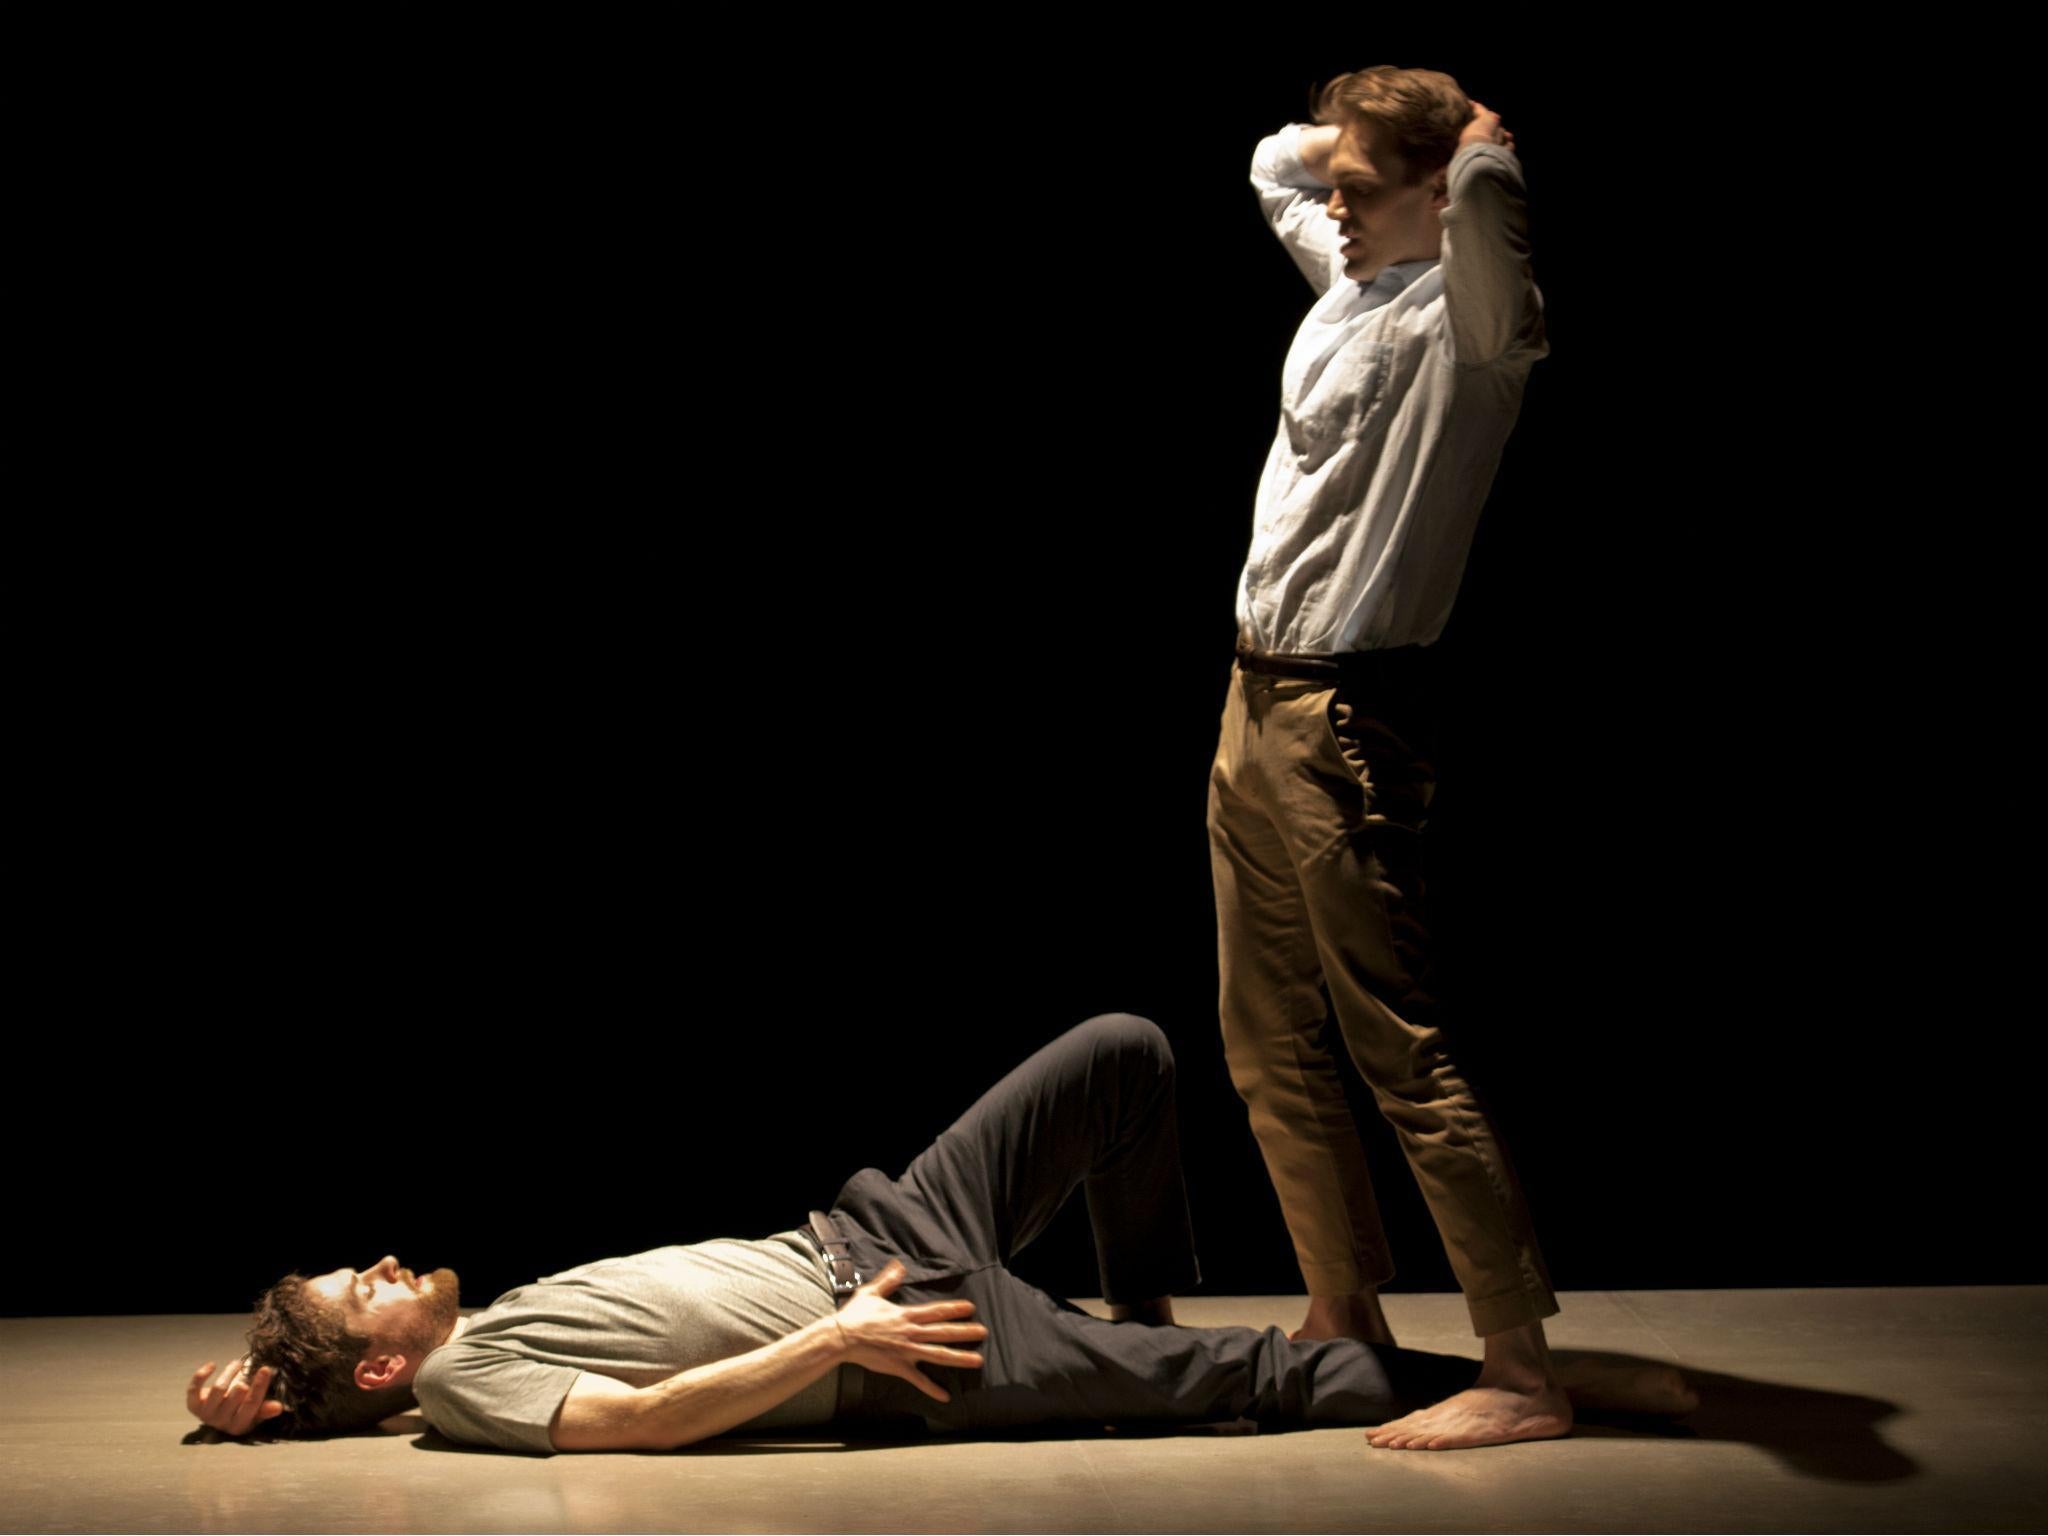 Andrew Burnap as Toby (right) and Kyle Soller as Eric in ‘The Inheritance’ at the Young Vic